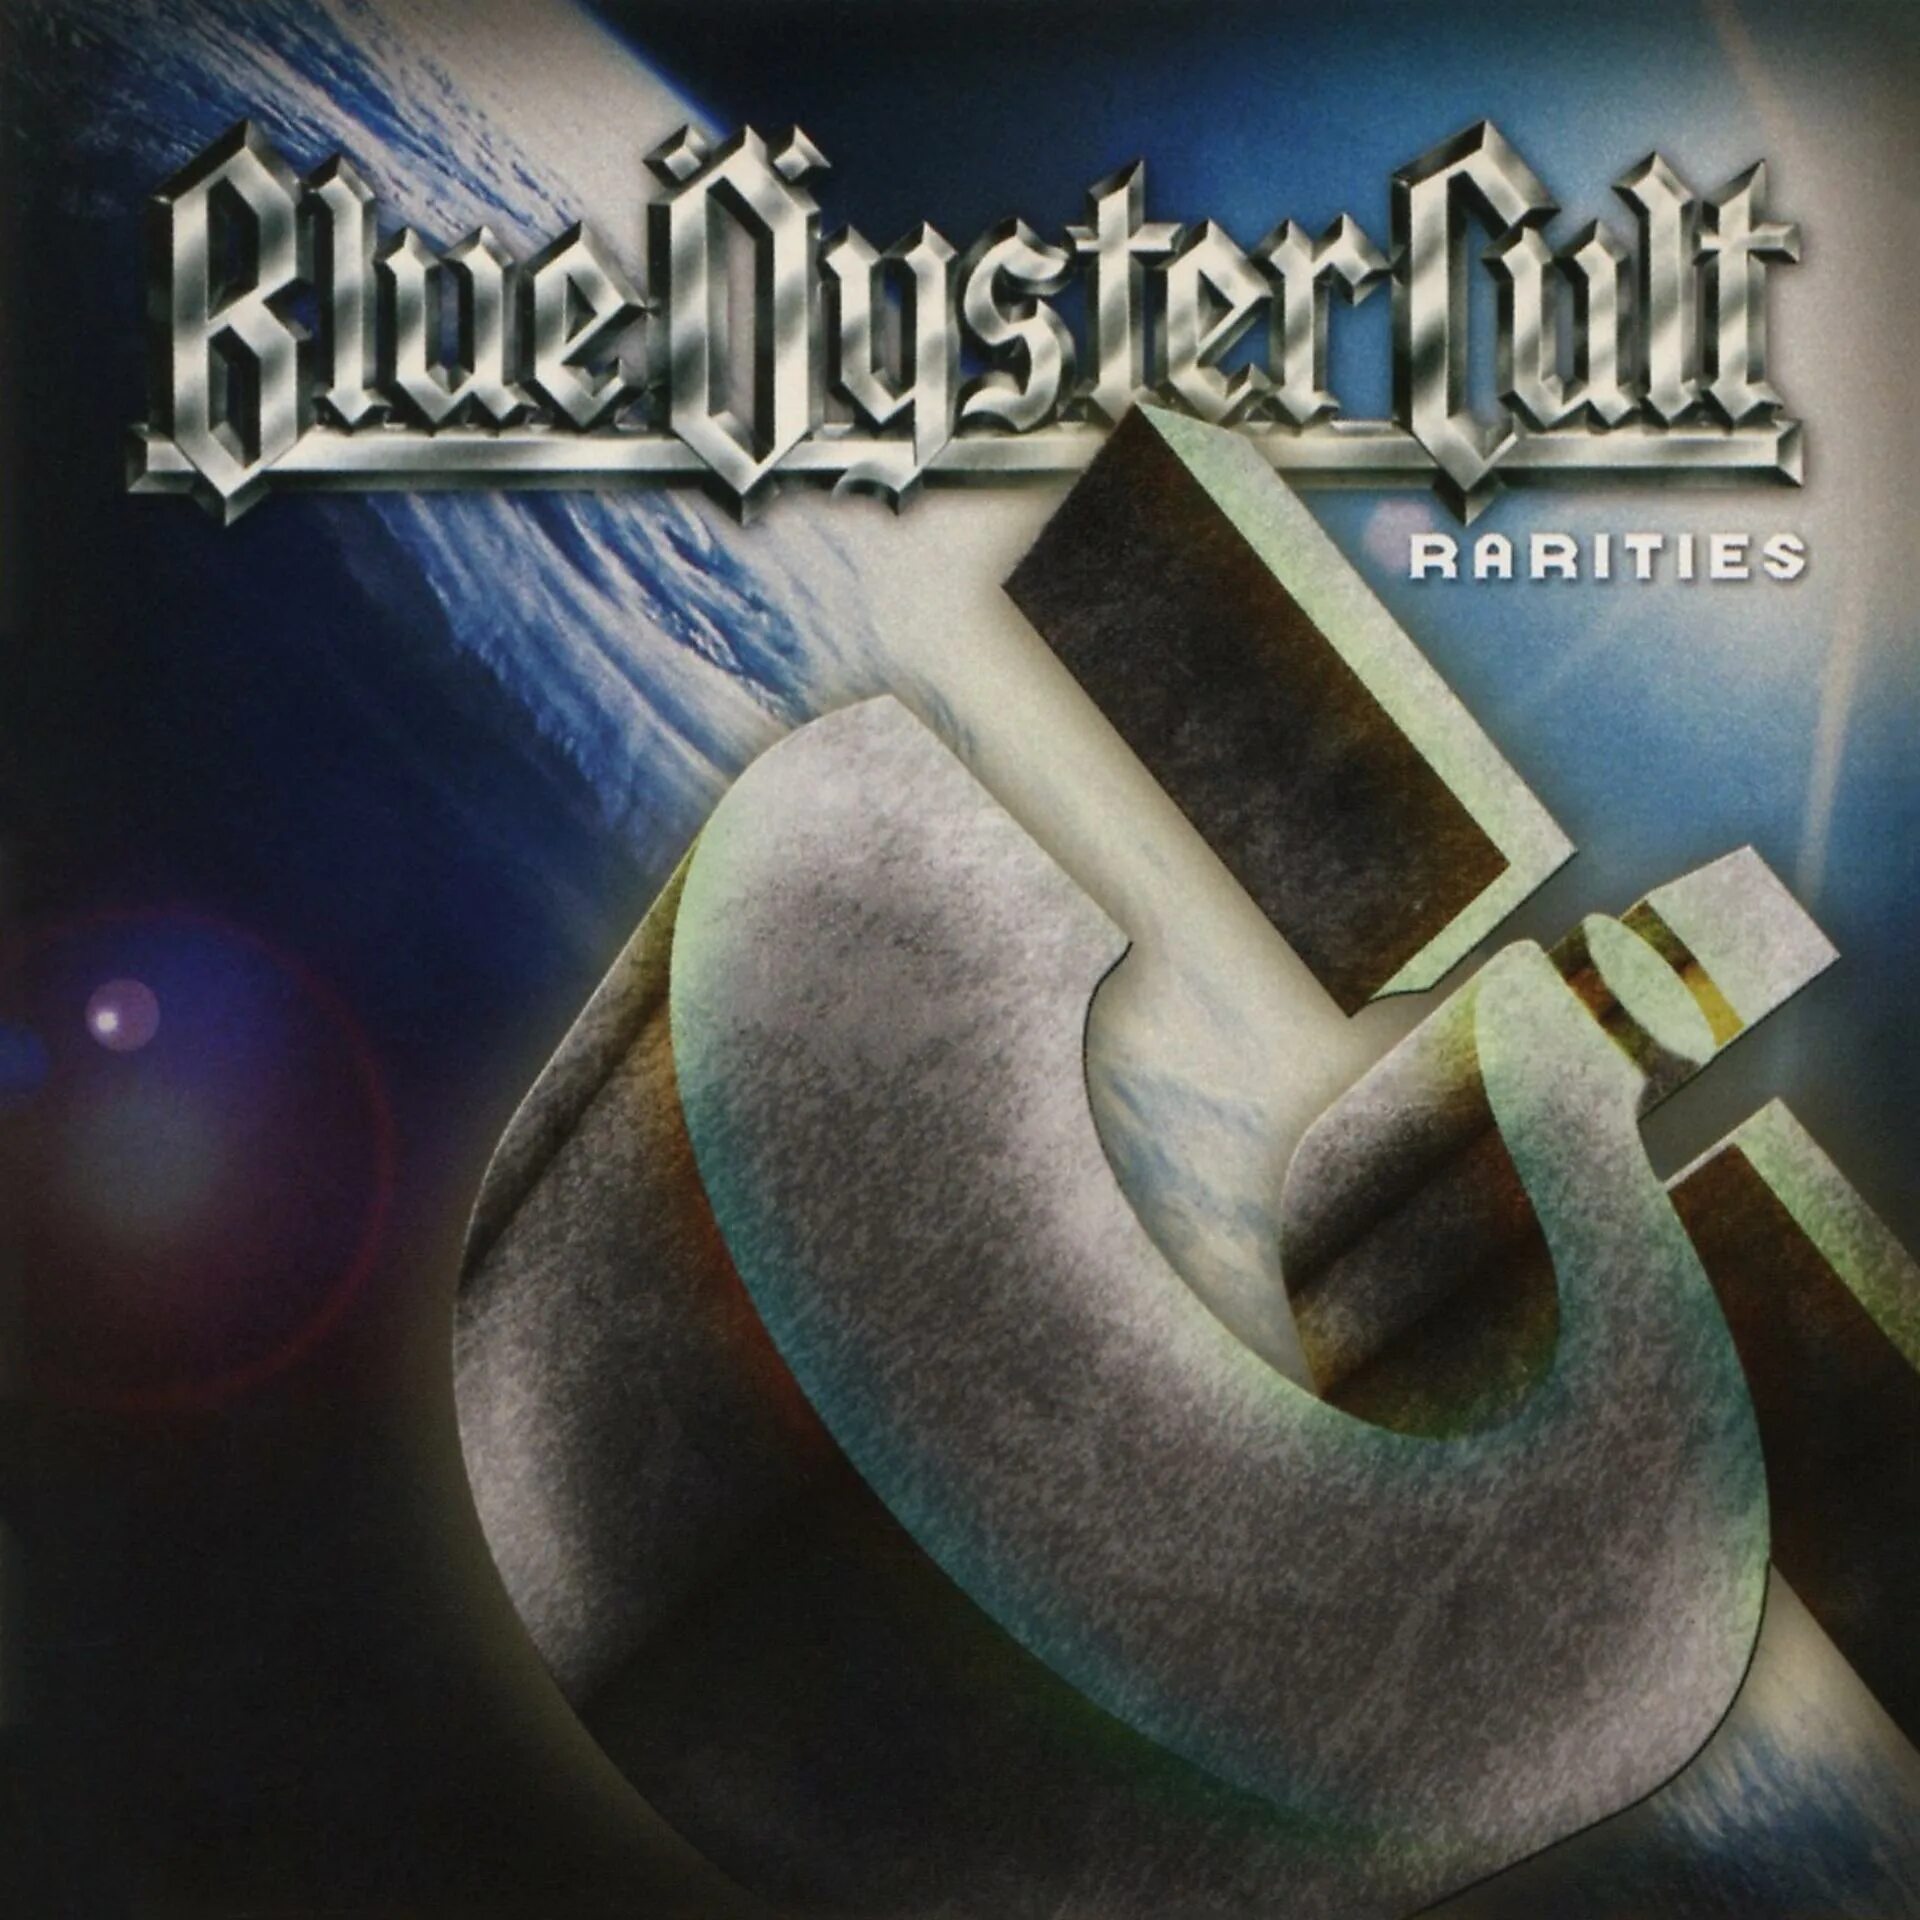 Blue Oyster Cult Spectres 1977. Blue Oyster Cult Rock Compilation. Blue Oyster Cult обложки альбомов. The Reaper Blue Oyster Cult. Razor demo